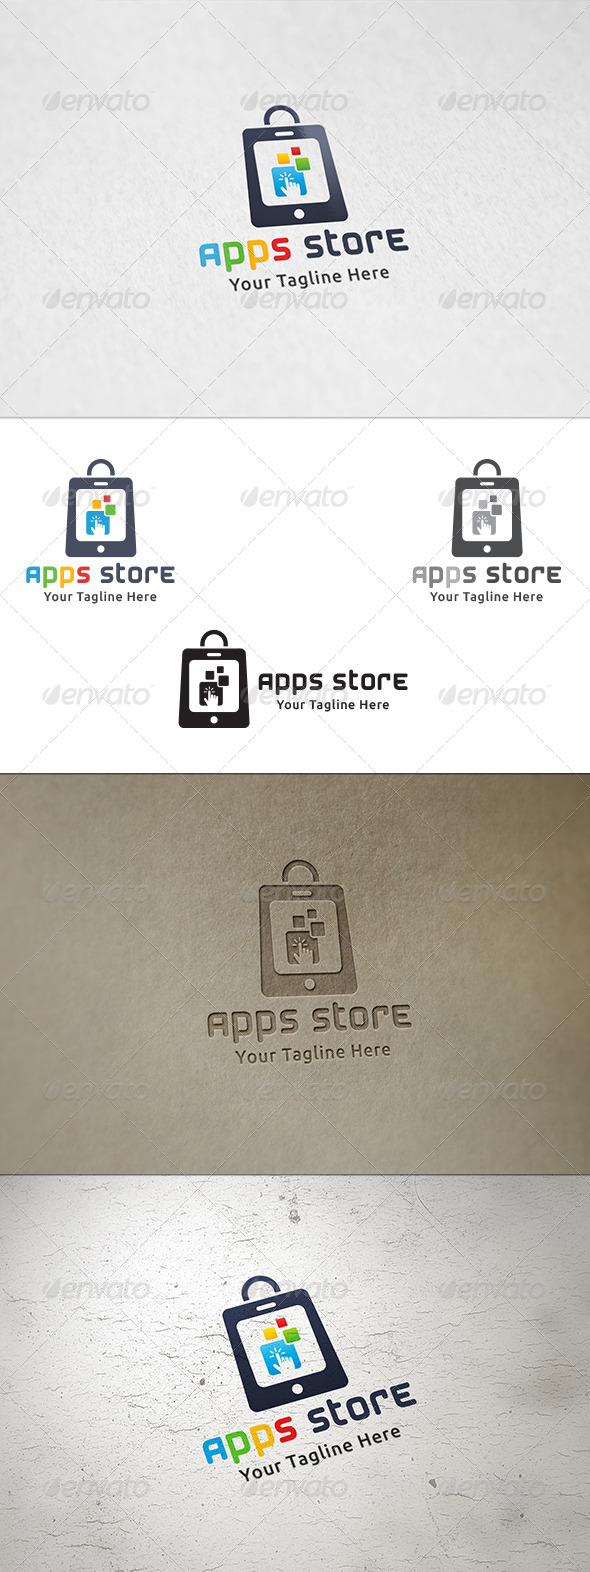 Apps Store - Logo Template